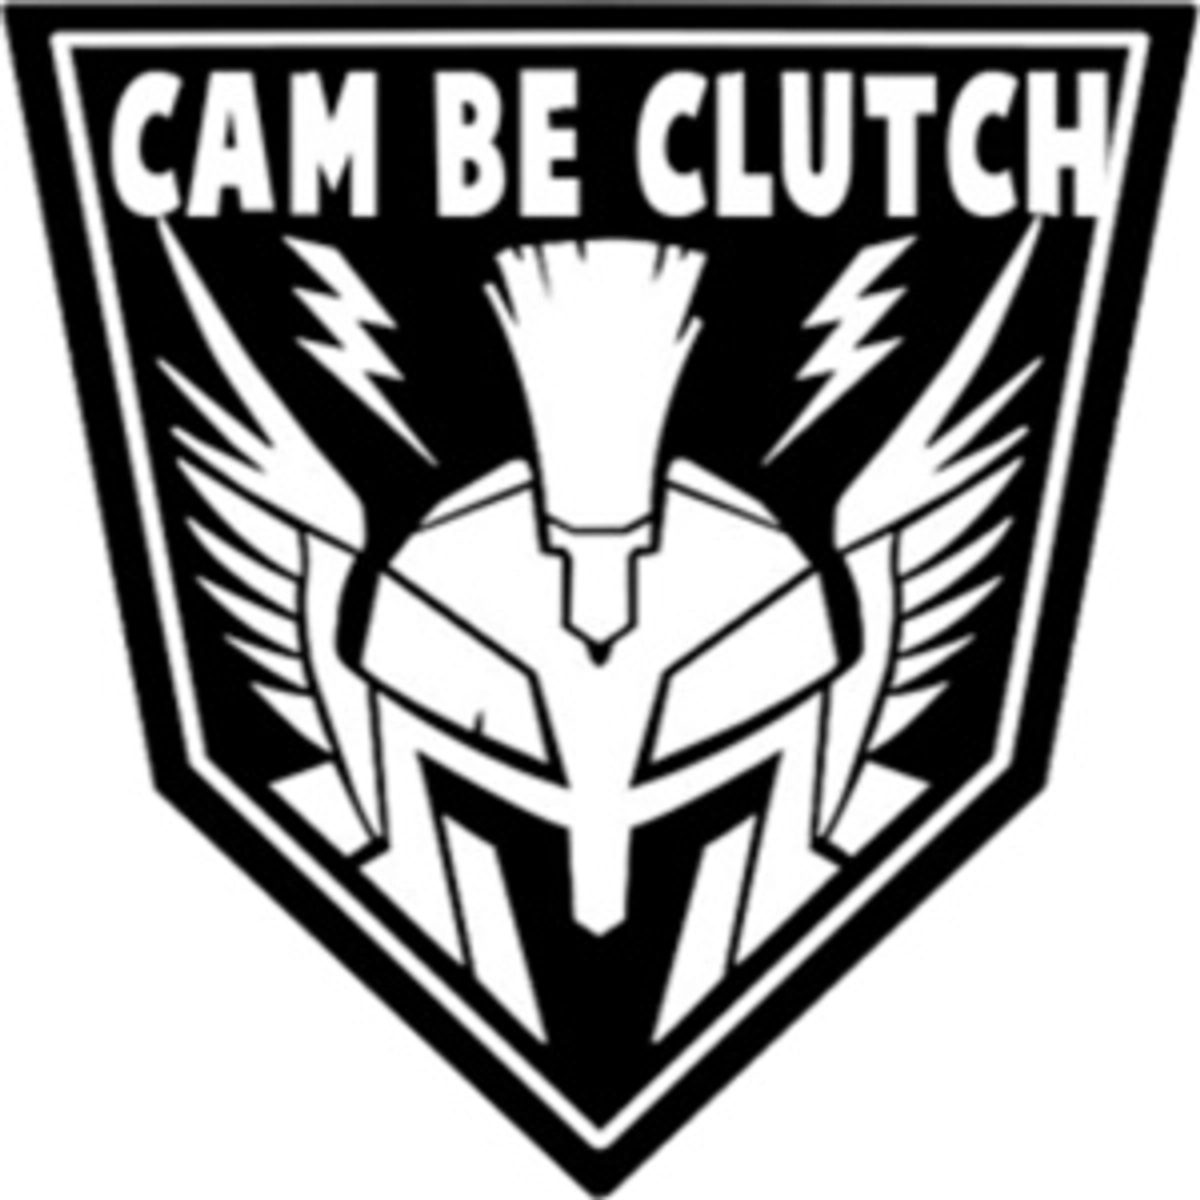 officialcambeclutch